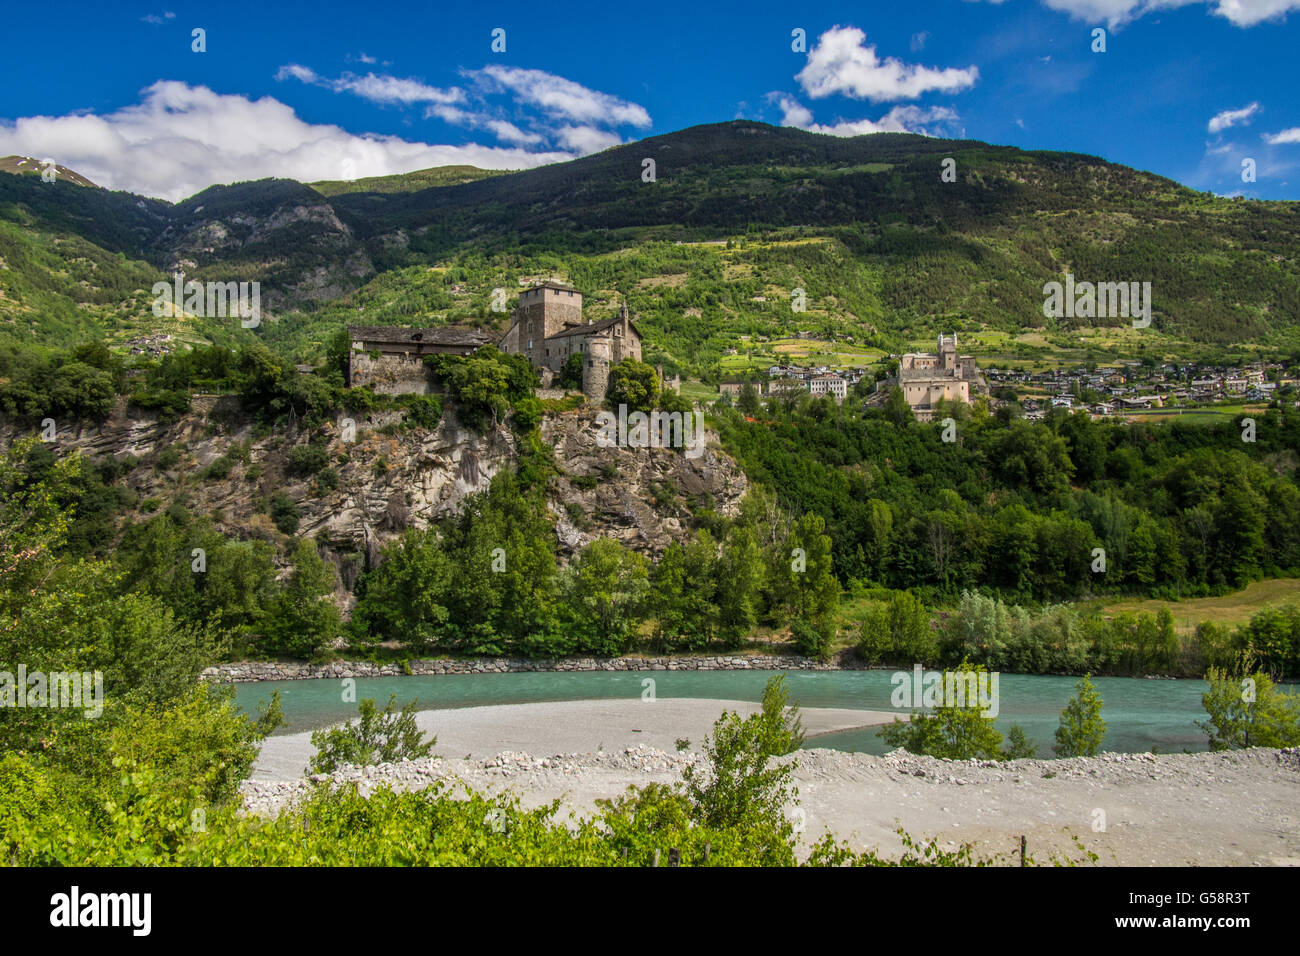 Aosta Valley with Saint Pierre Castle (right) and Village, Italy. Stock Photo